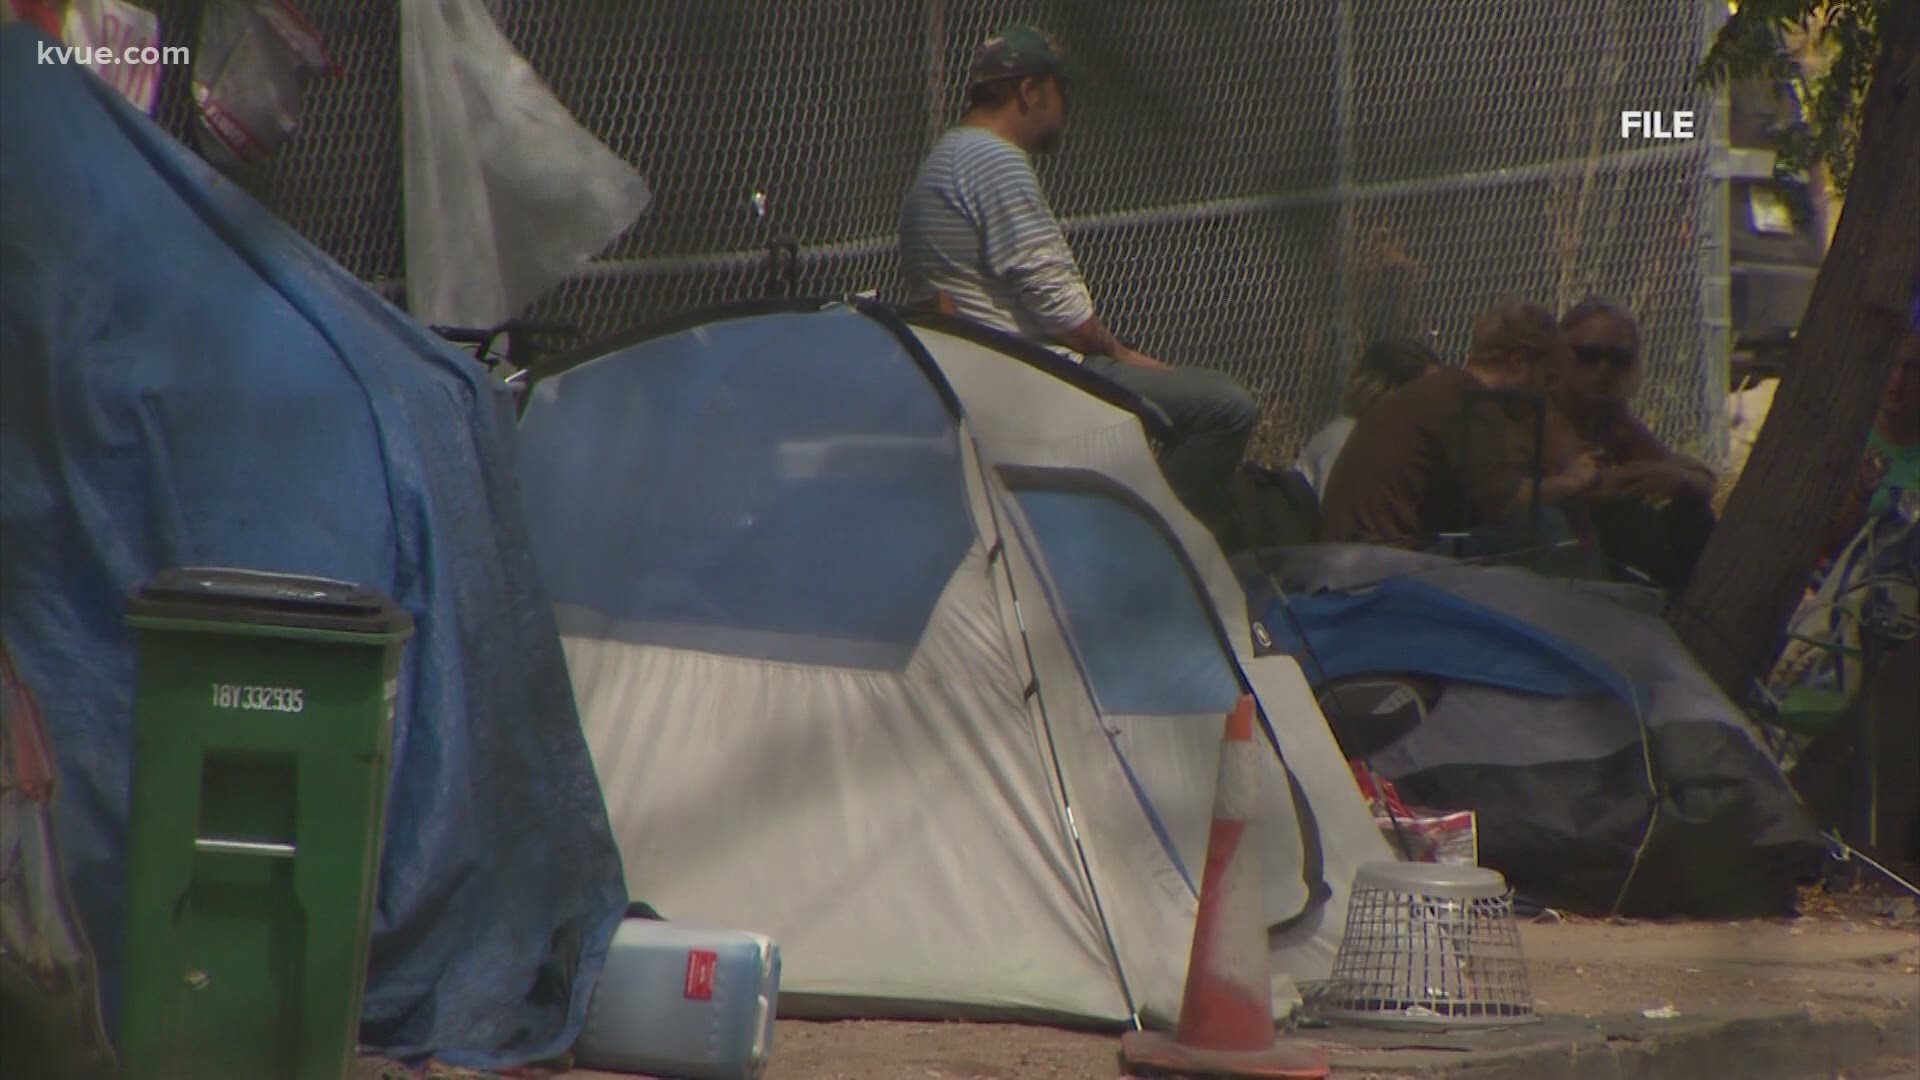 A petition to reinstate Austin's camping ban will be on the May ballot.